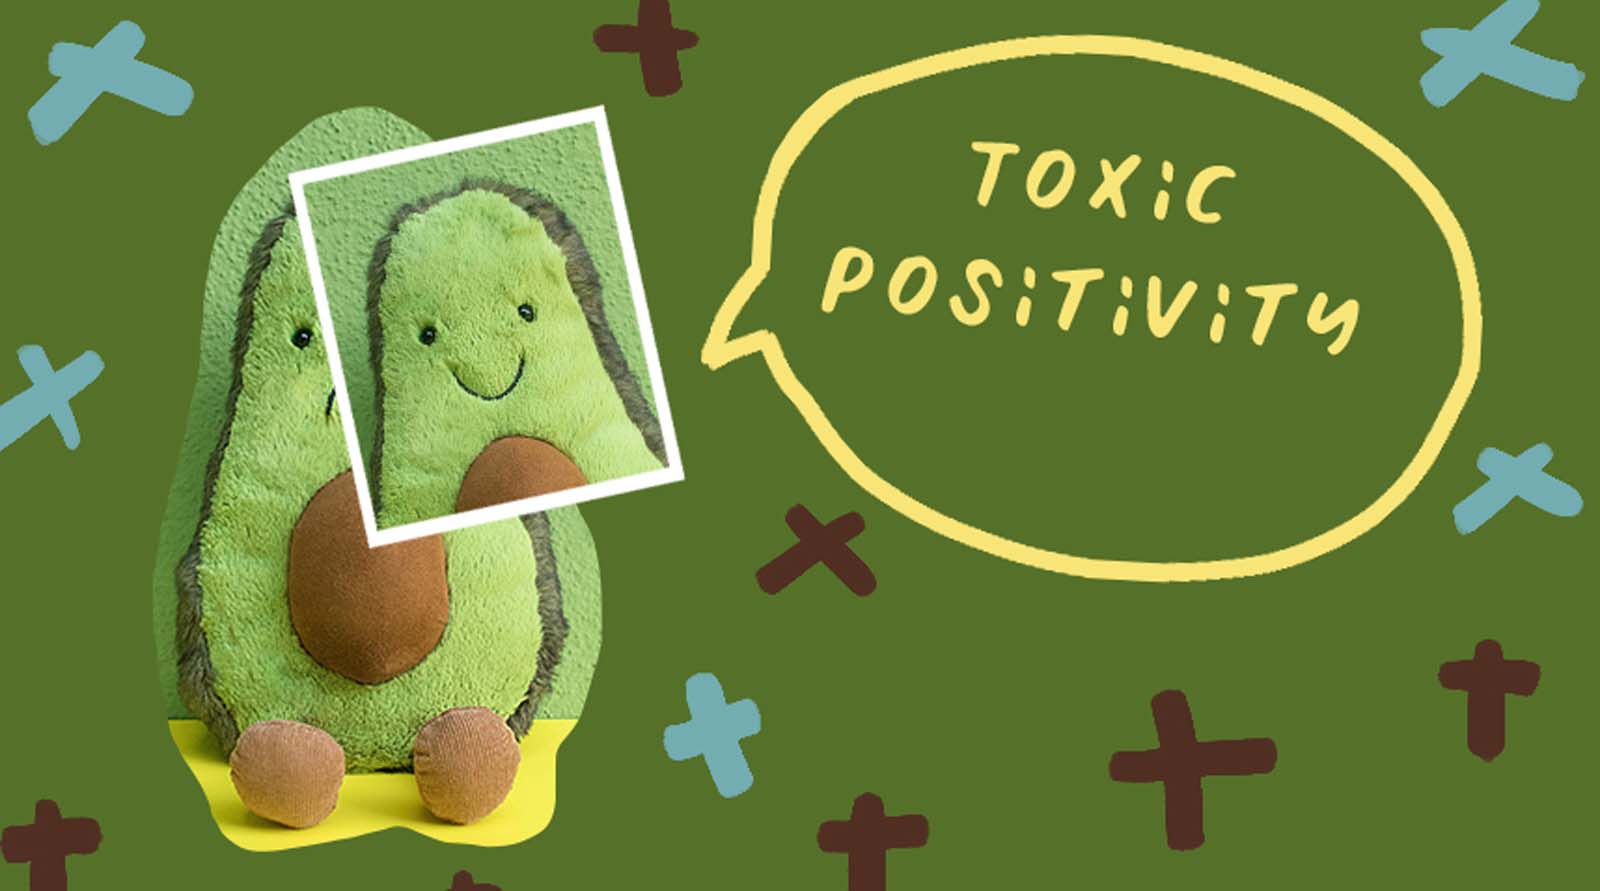 Toxic Positivity: When Always Looking On The Bright Side Is Harmful